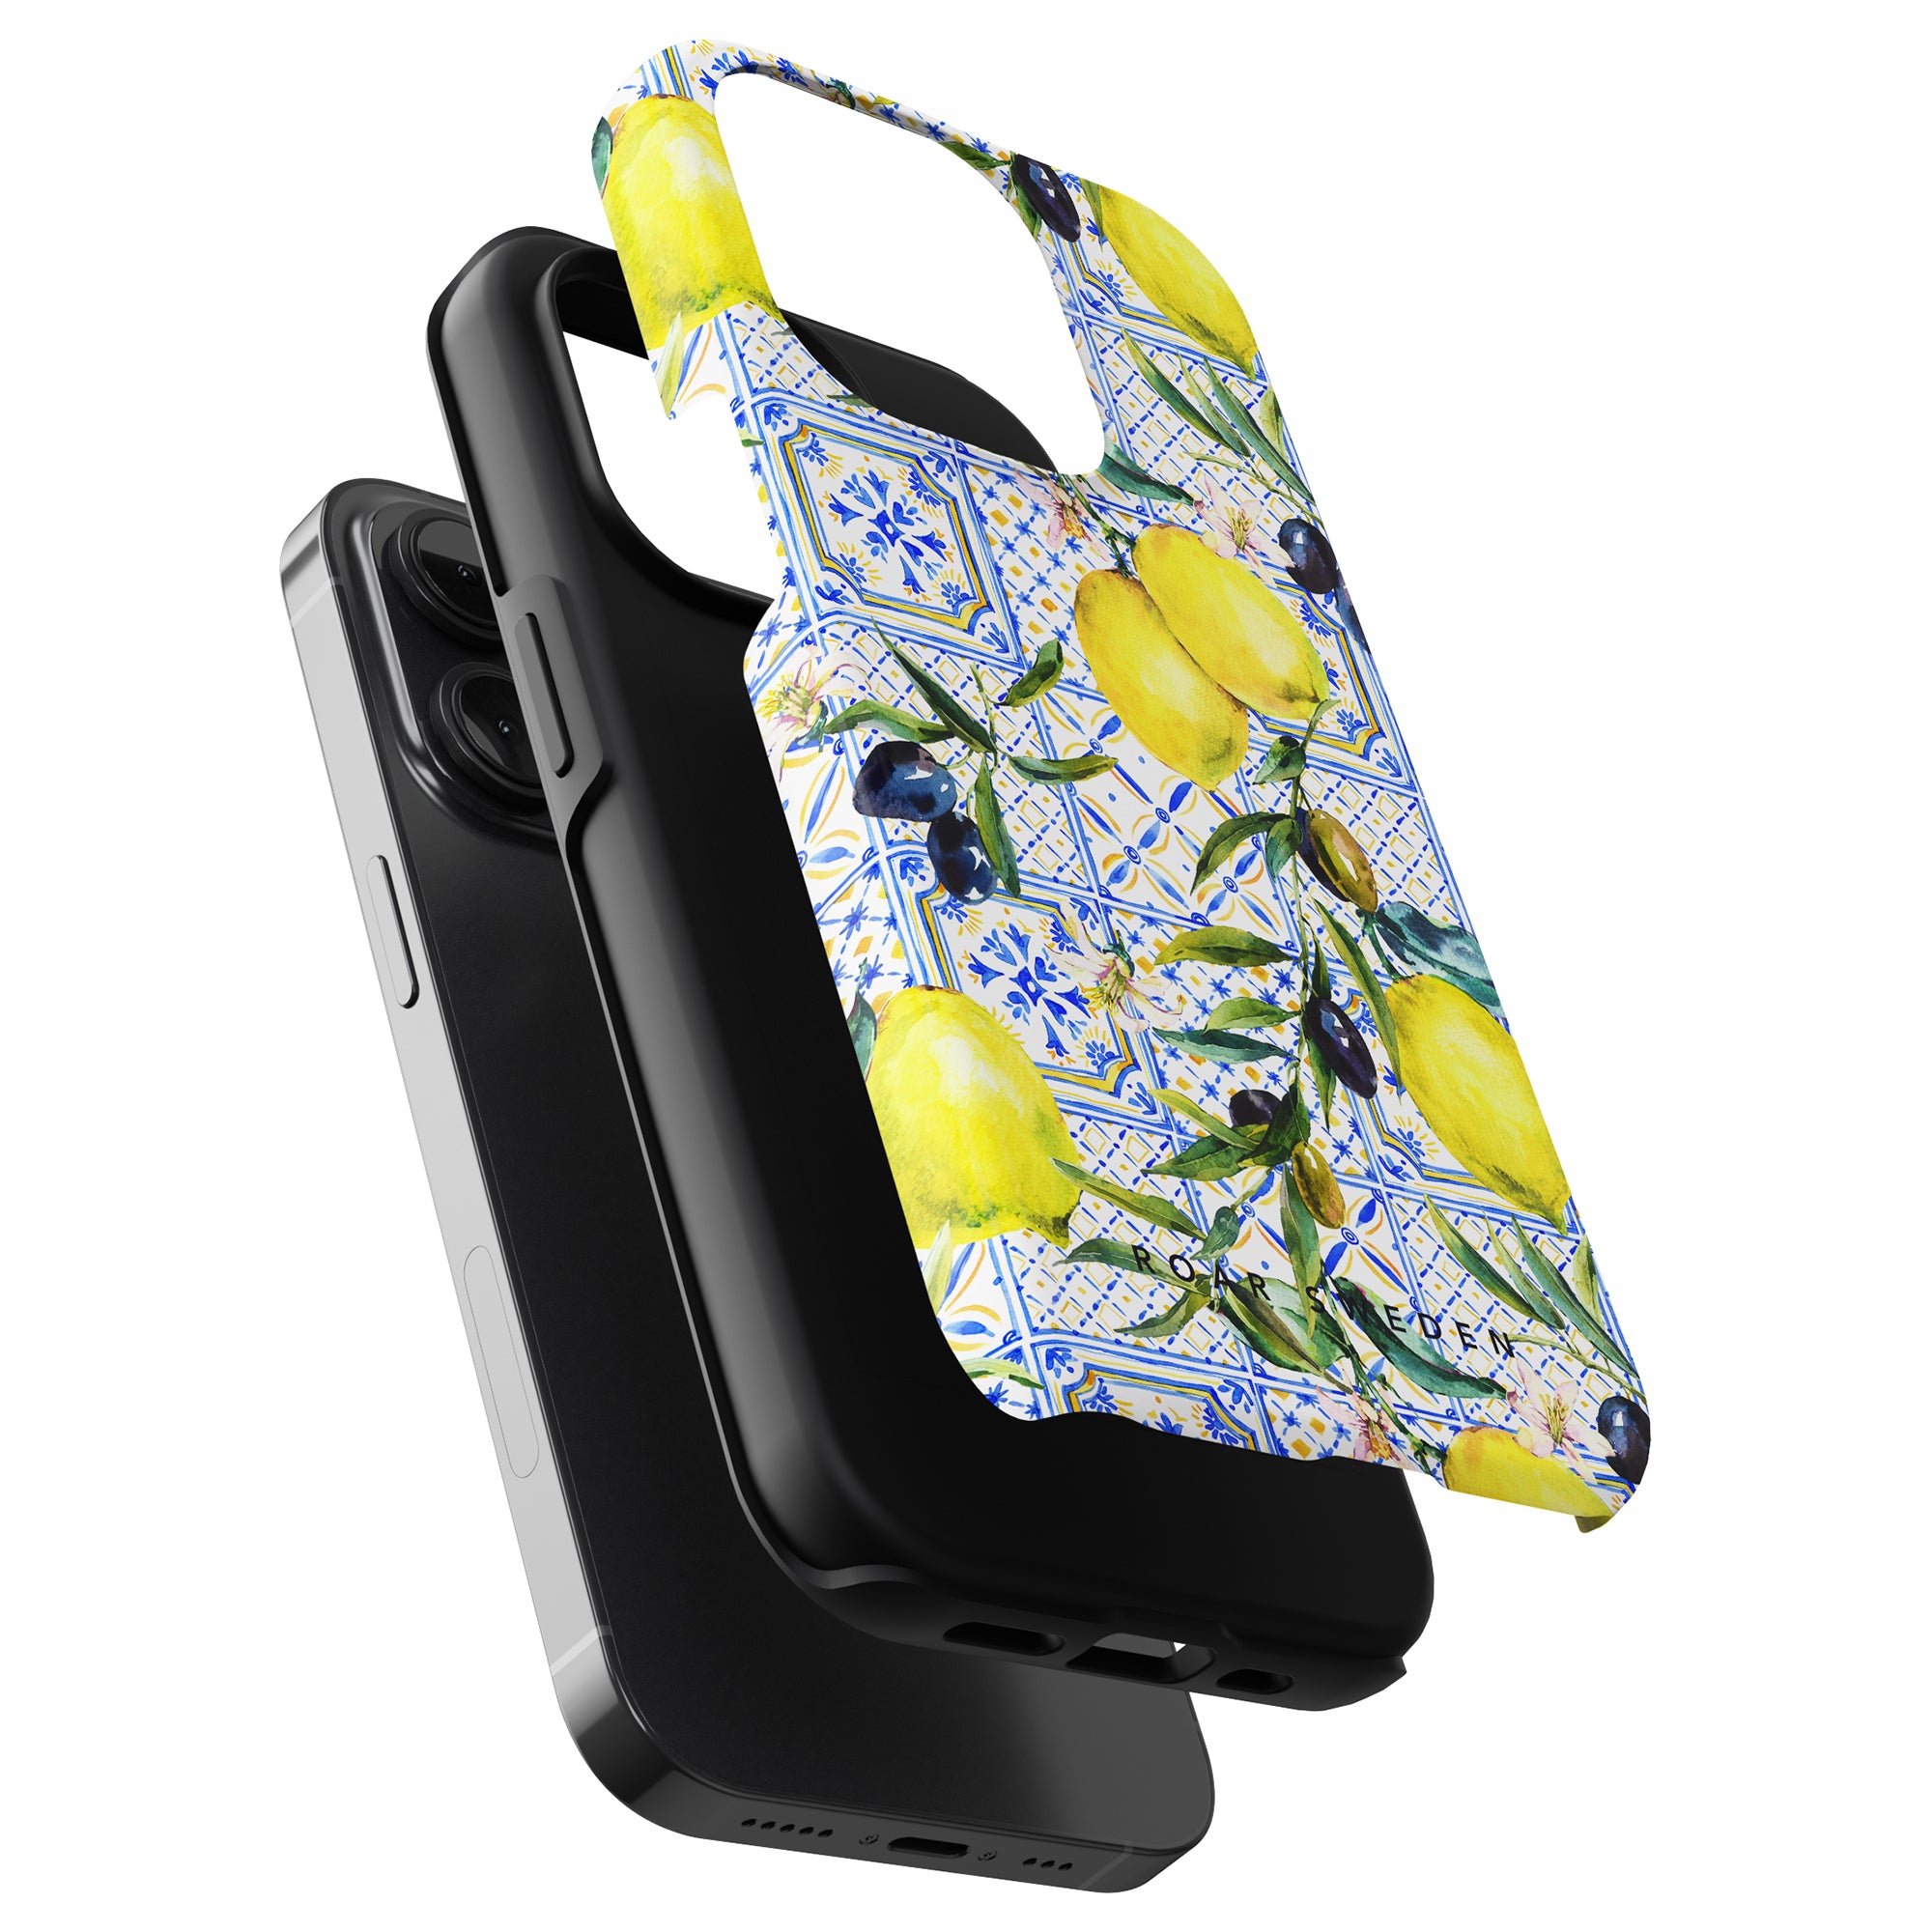 Amalfi - Tough Case with a black case and a decorative strap featuring a lemon pattern against a water-resistant background.